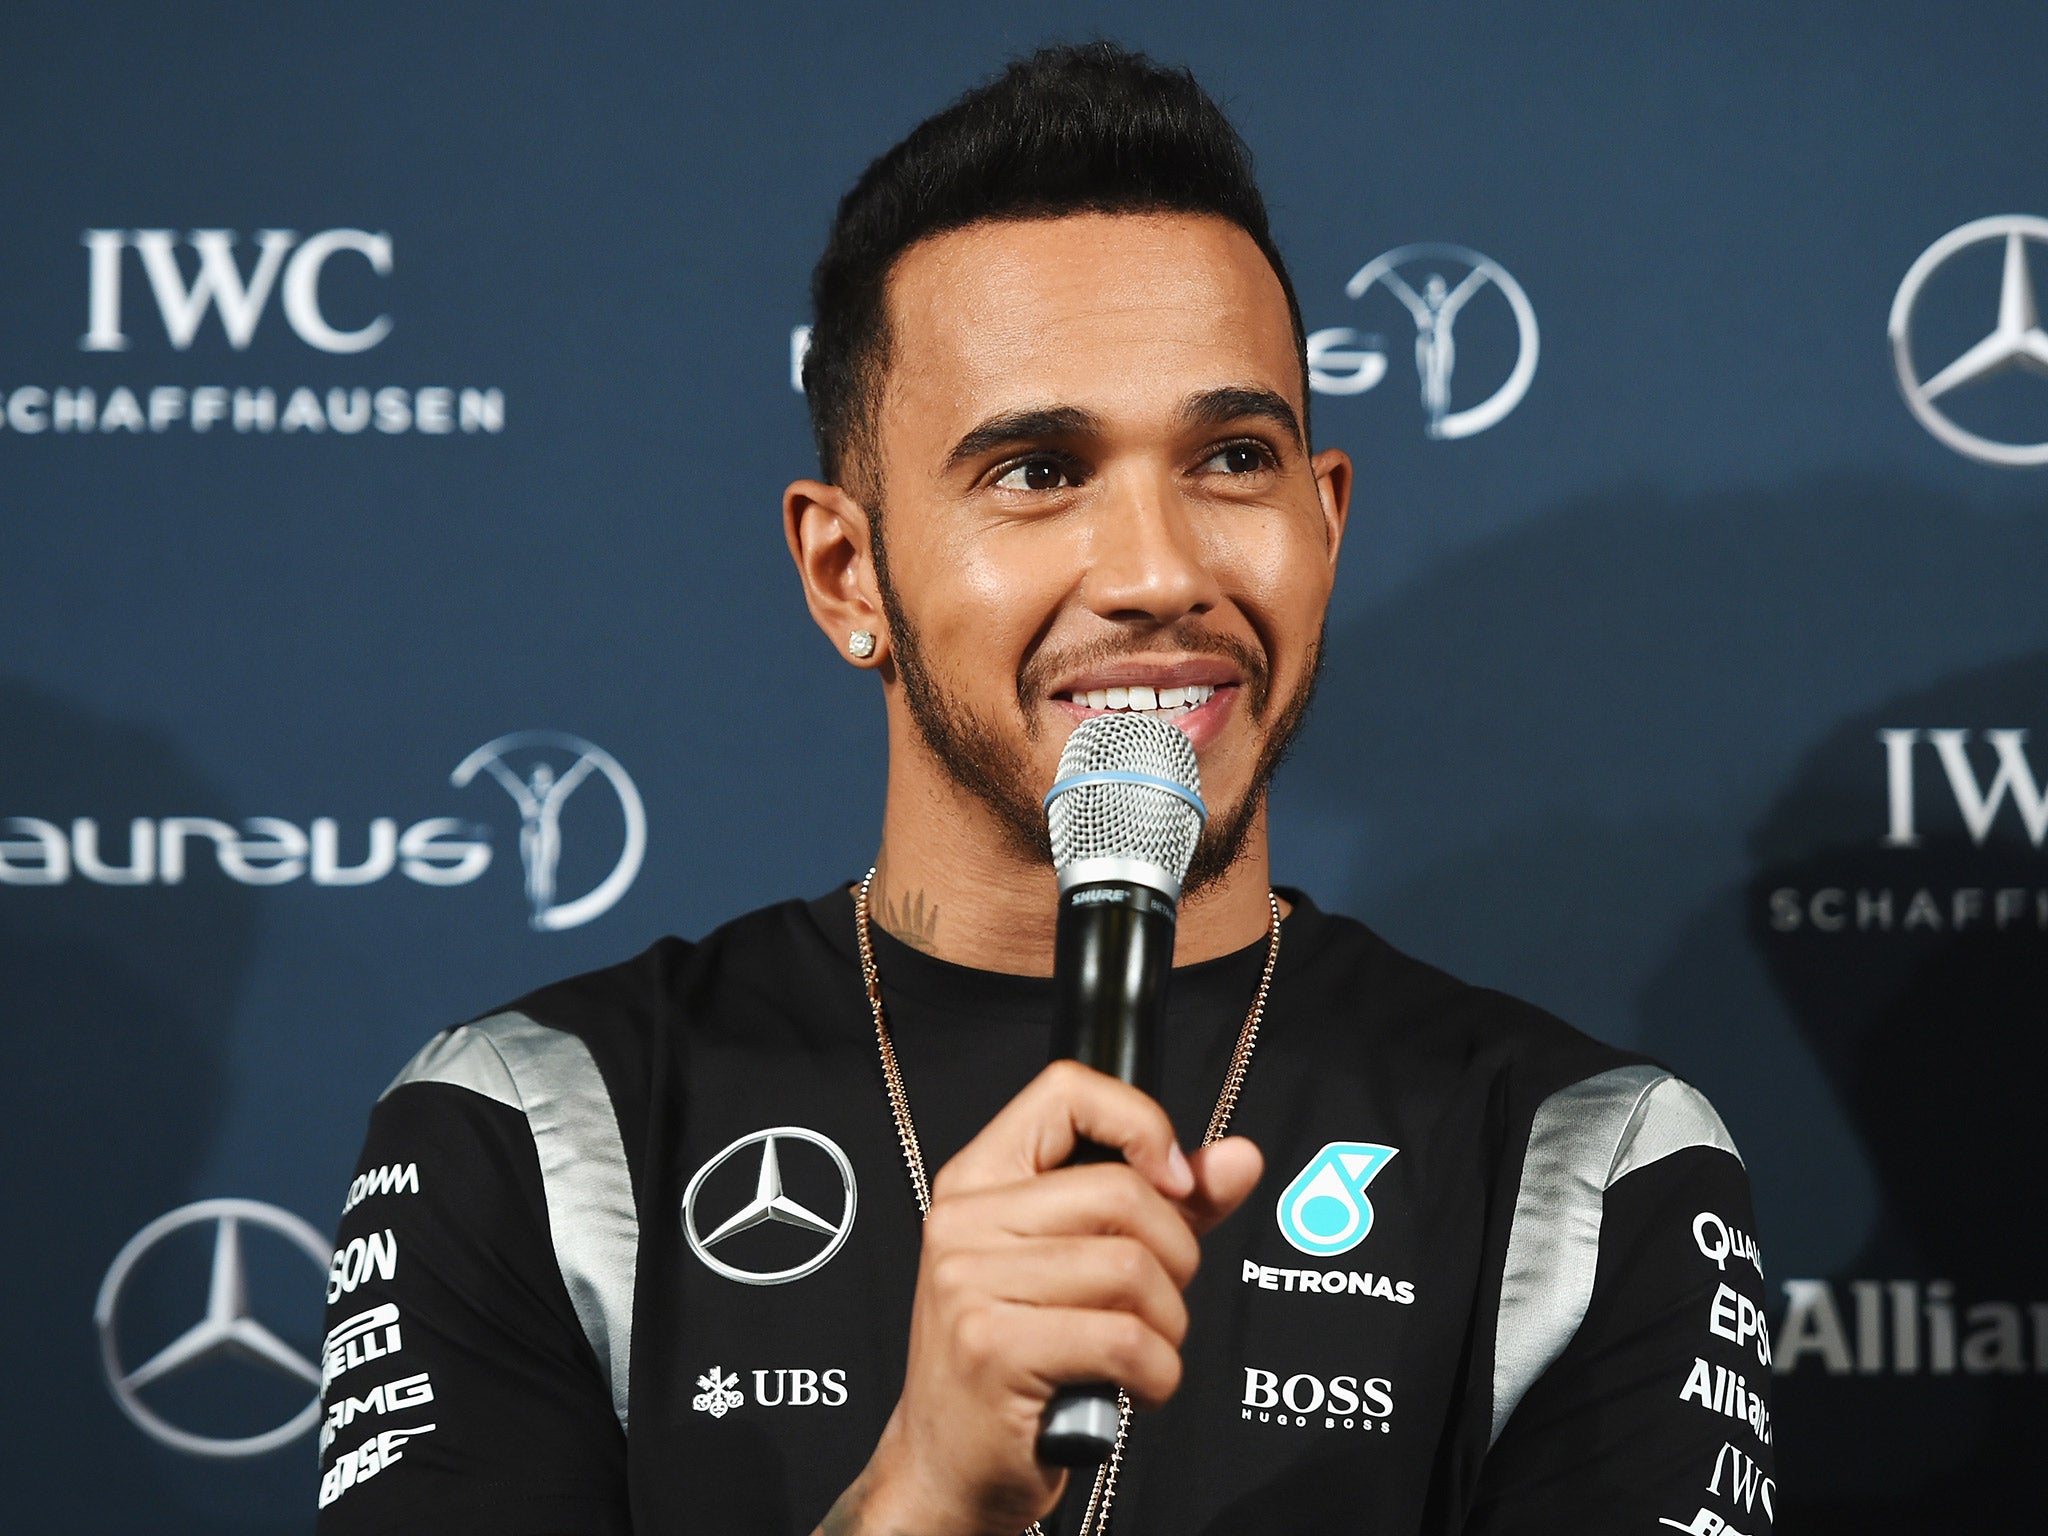 Lewis Hamilton said Red Bull's design looks 'half-arsed' and 'like a riot shield'